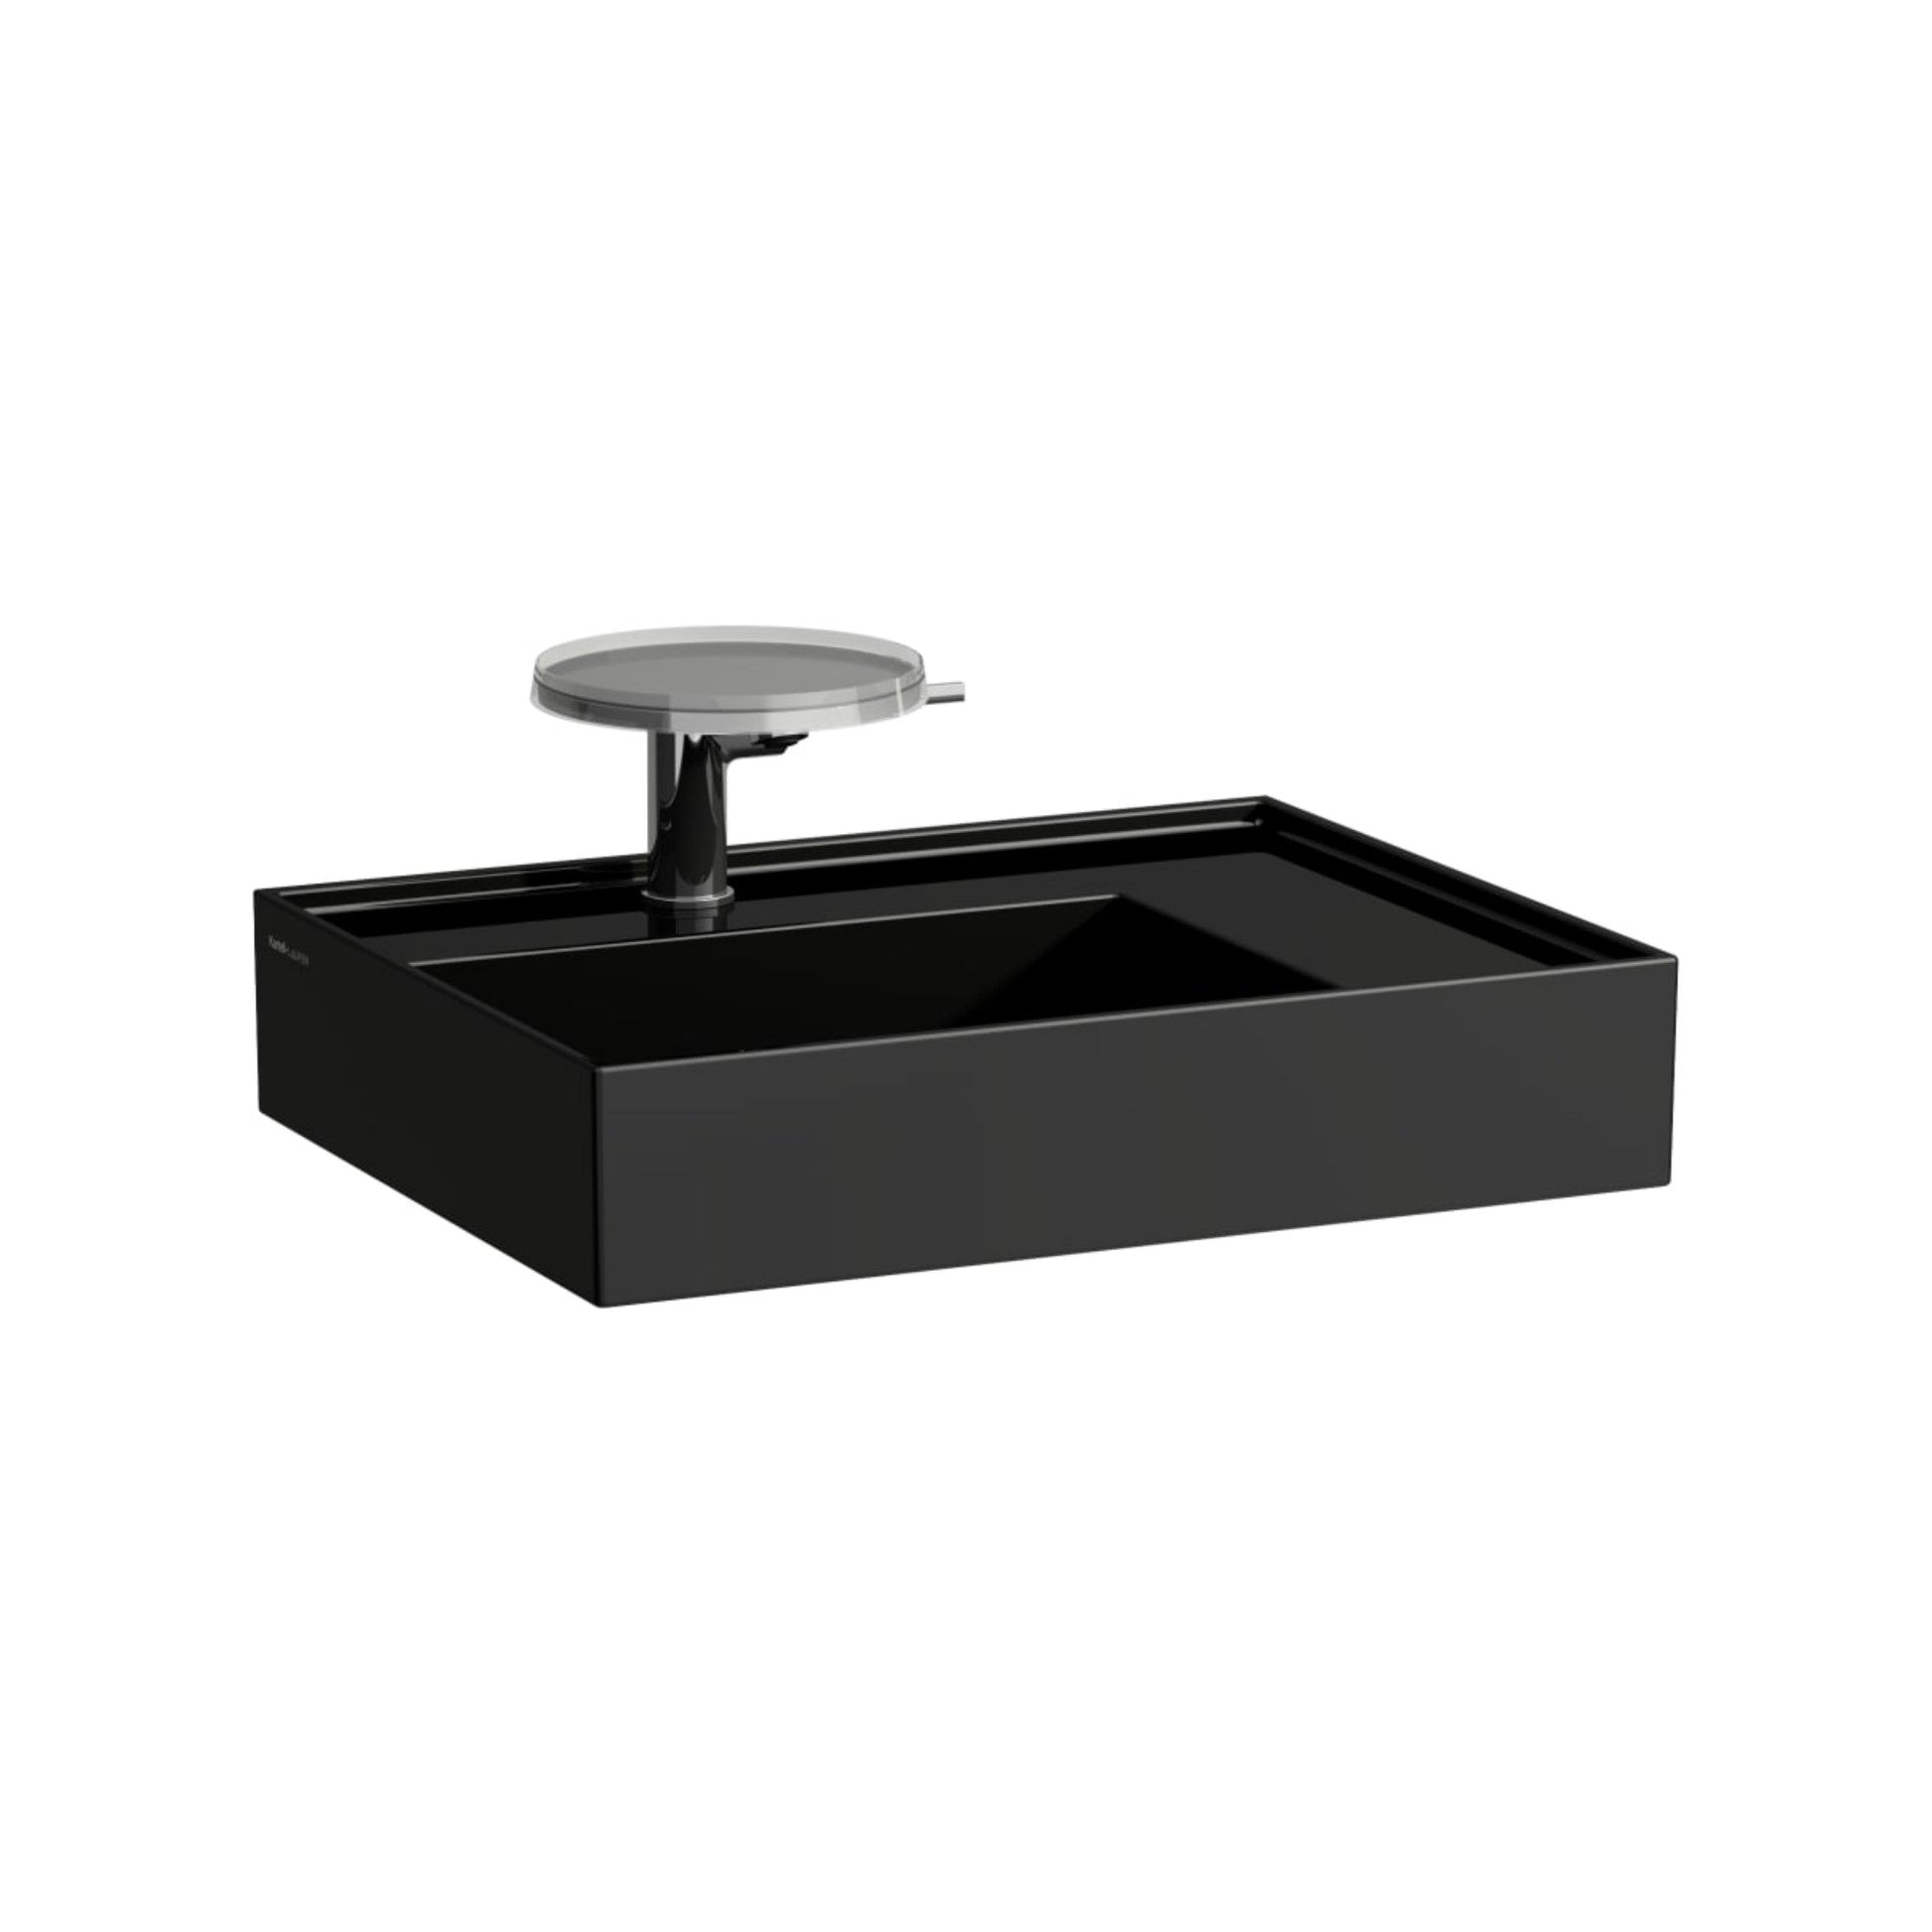 Laufen Kartell 24" x 18" Glossy Black Countertop Shelf-Right Bathroom Sink With Faucet Hole